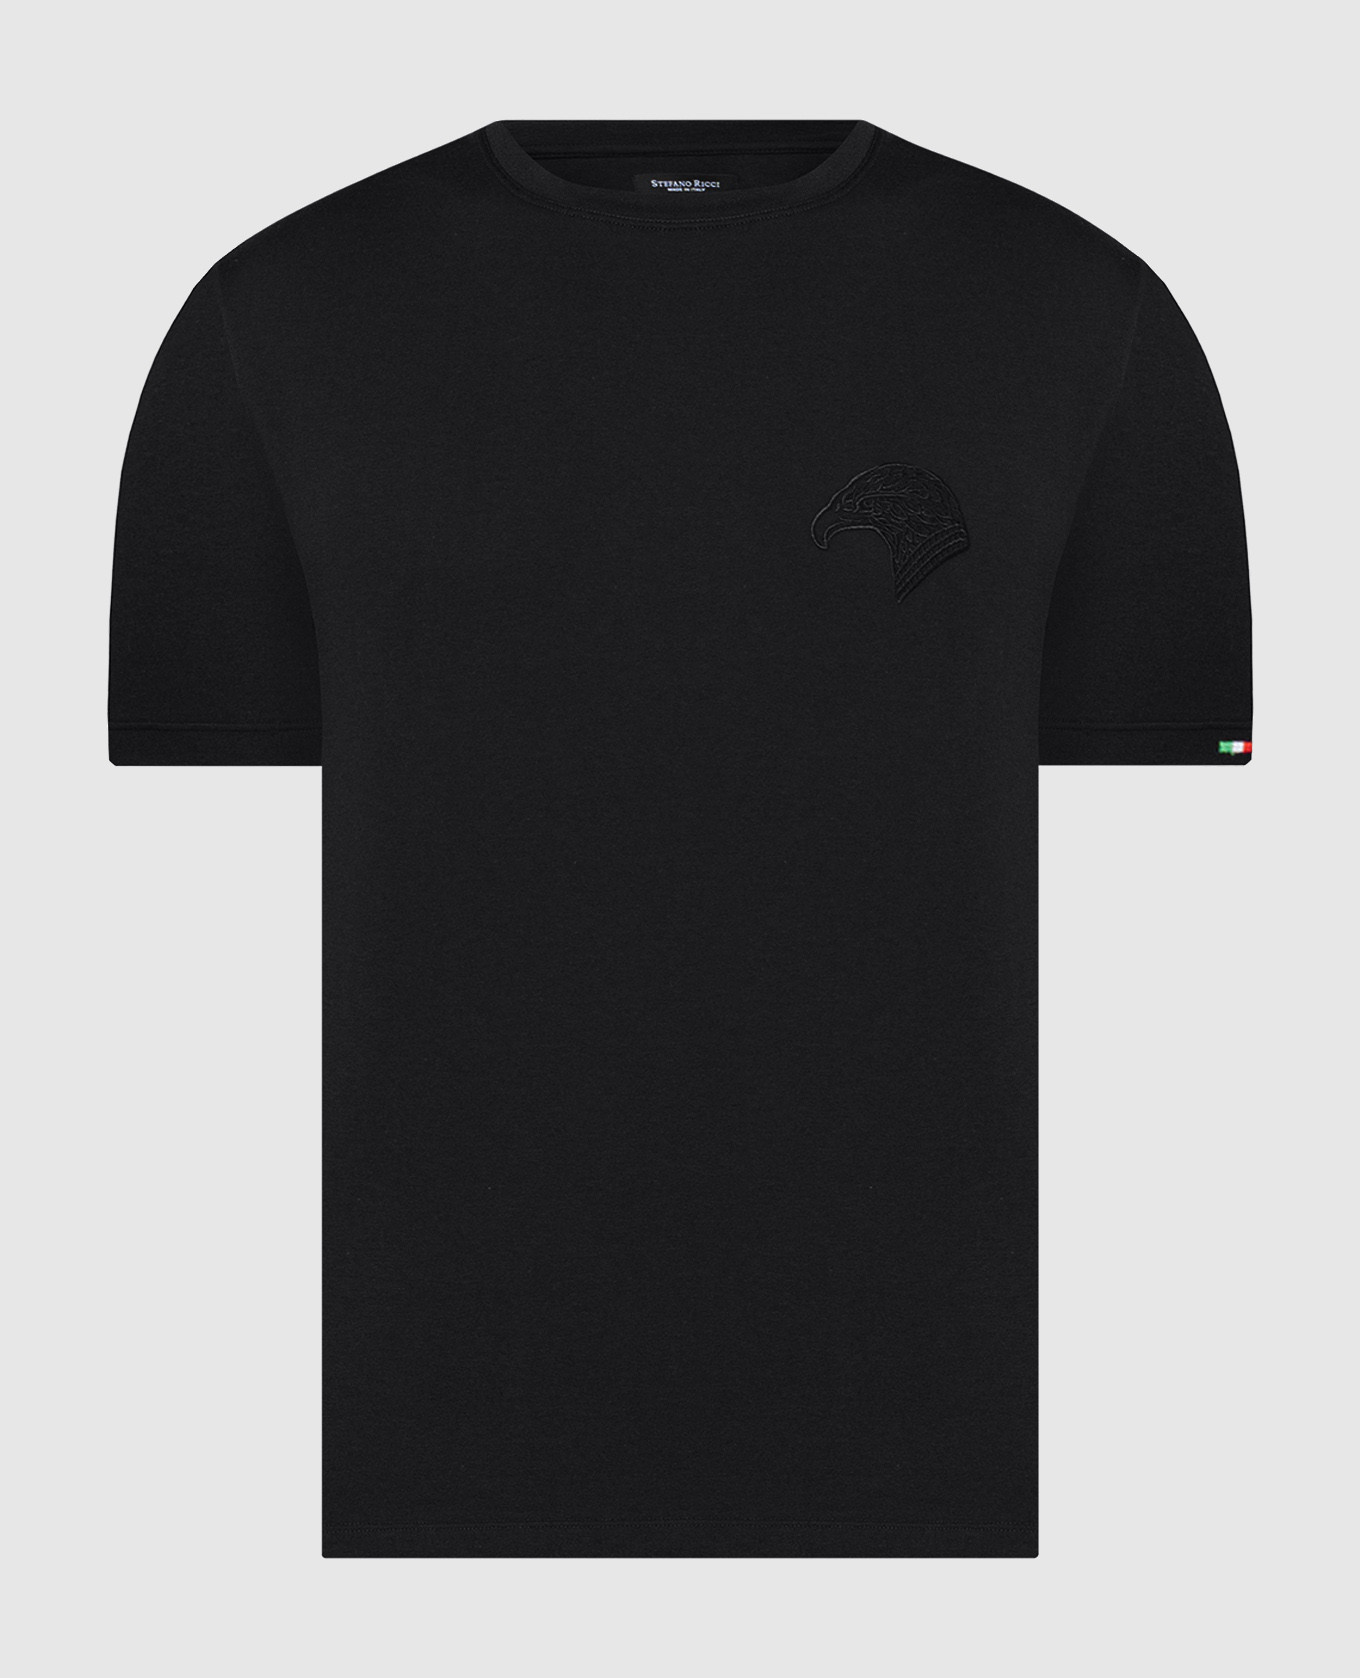 Black t-shirt with embroidered logo emblem in the form of an eagle head